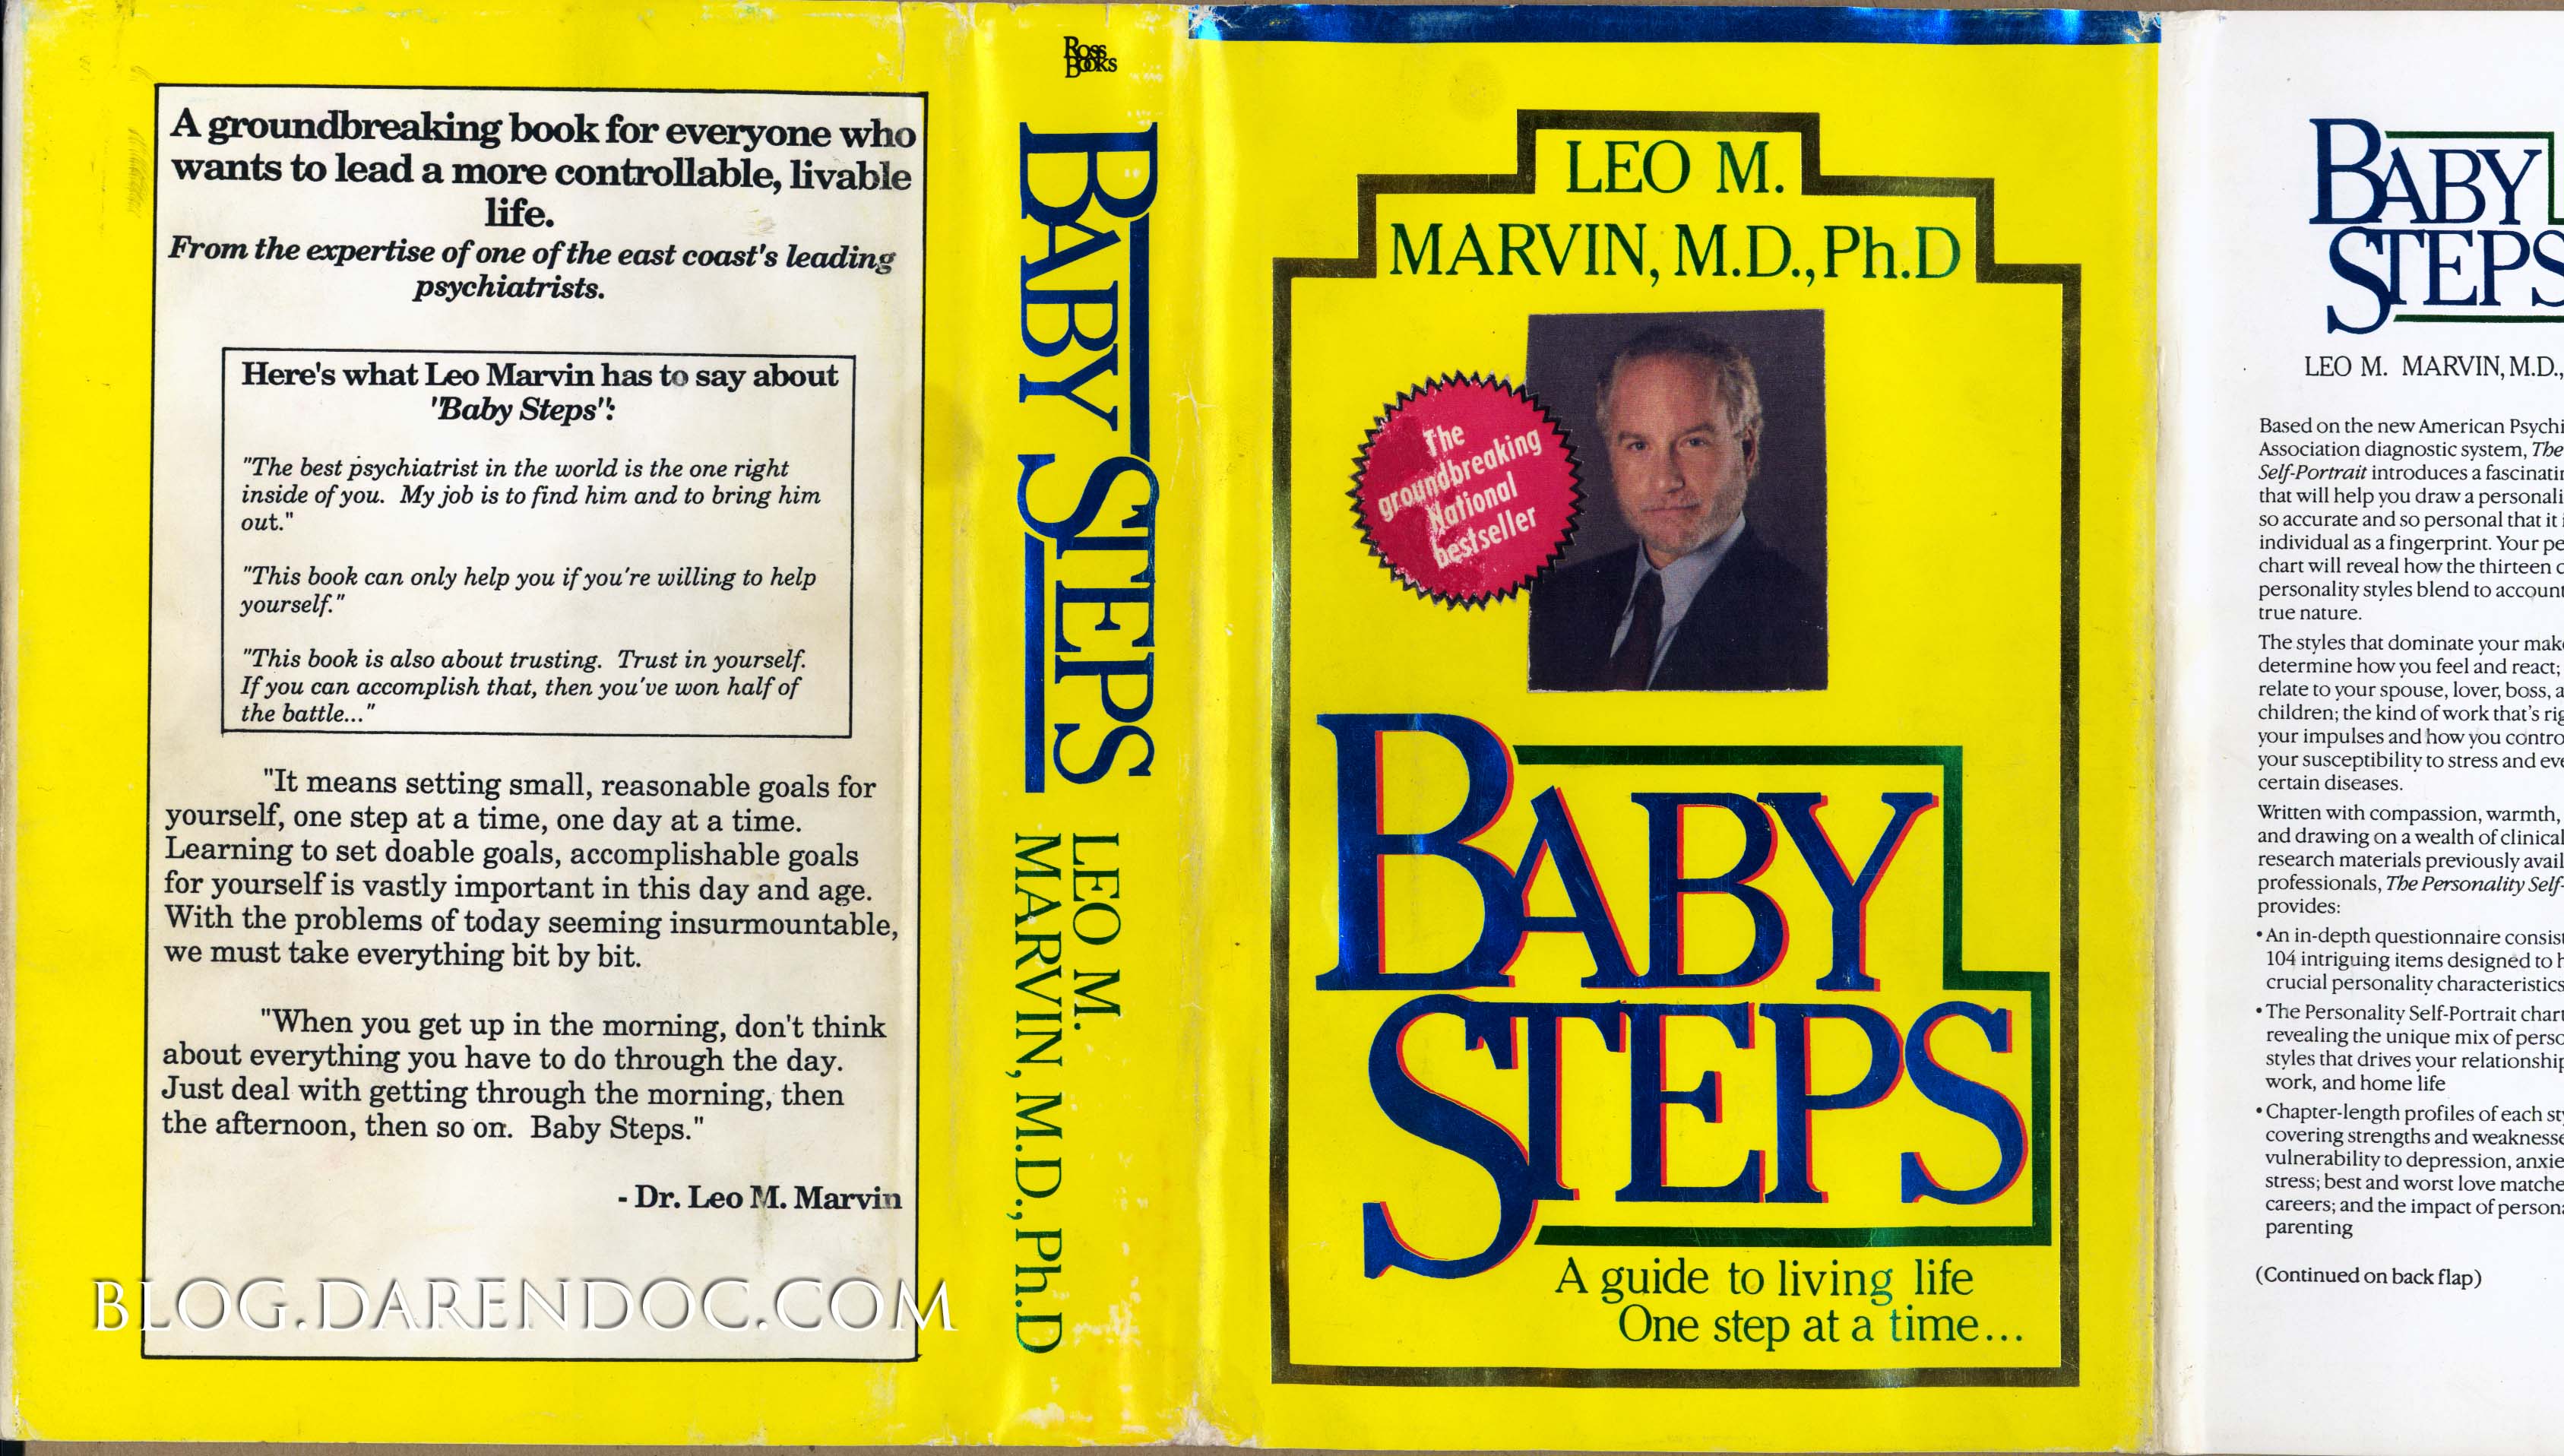 Baby Steps, by Dr. Leo Marvin